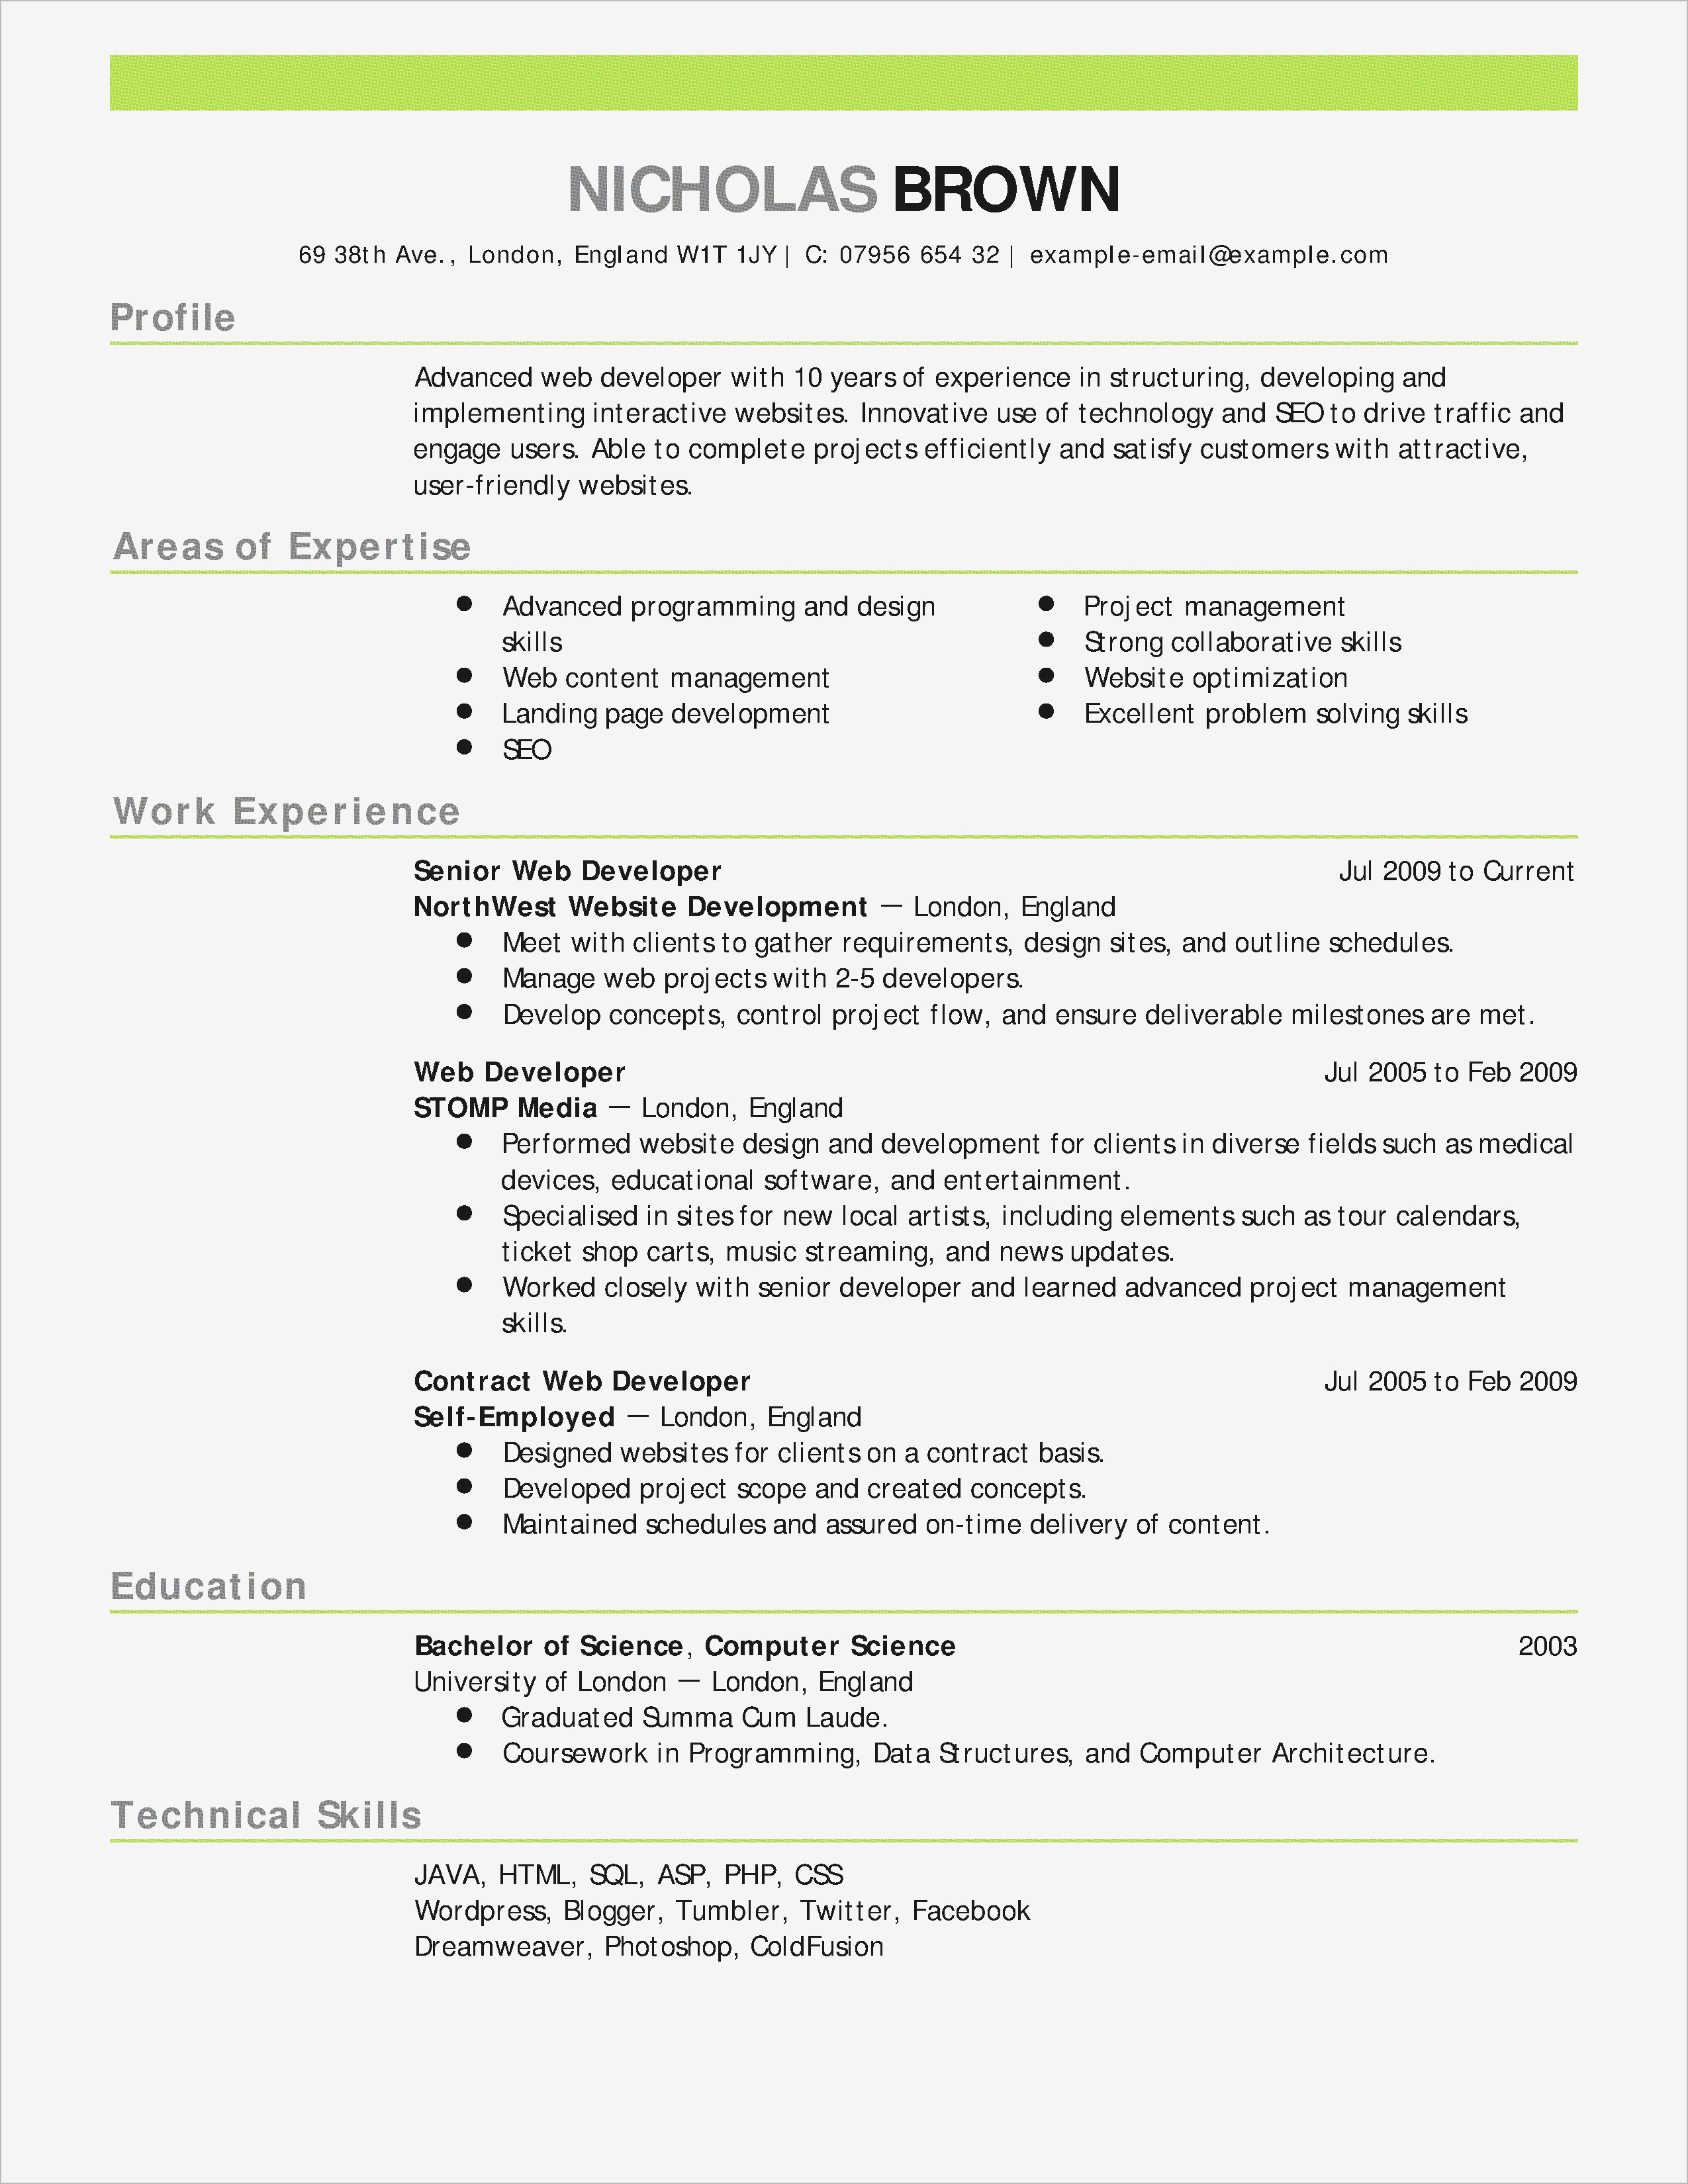 accredited investor verification letter template example-Date Birth format In Resume Unique Professional Job Resume Template Od Specialist Cover Letter Lead 14-h